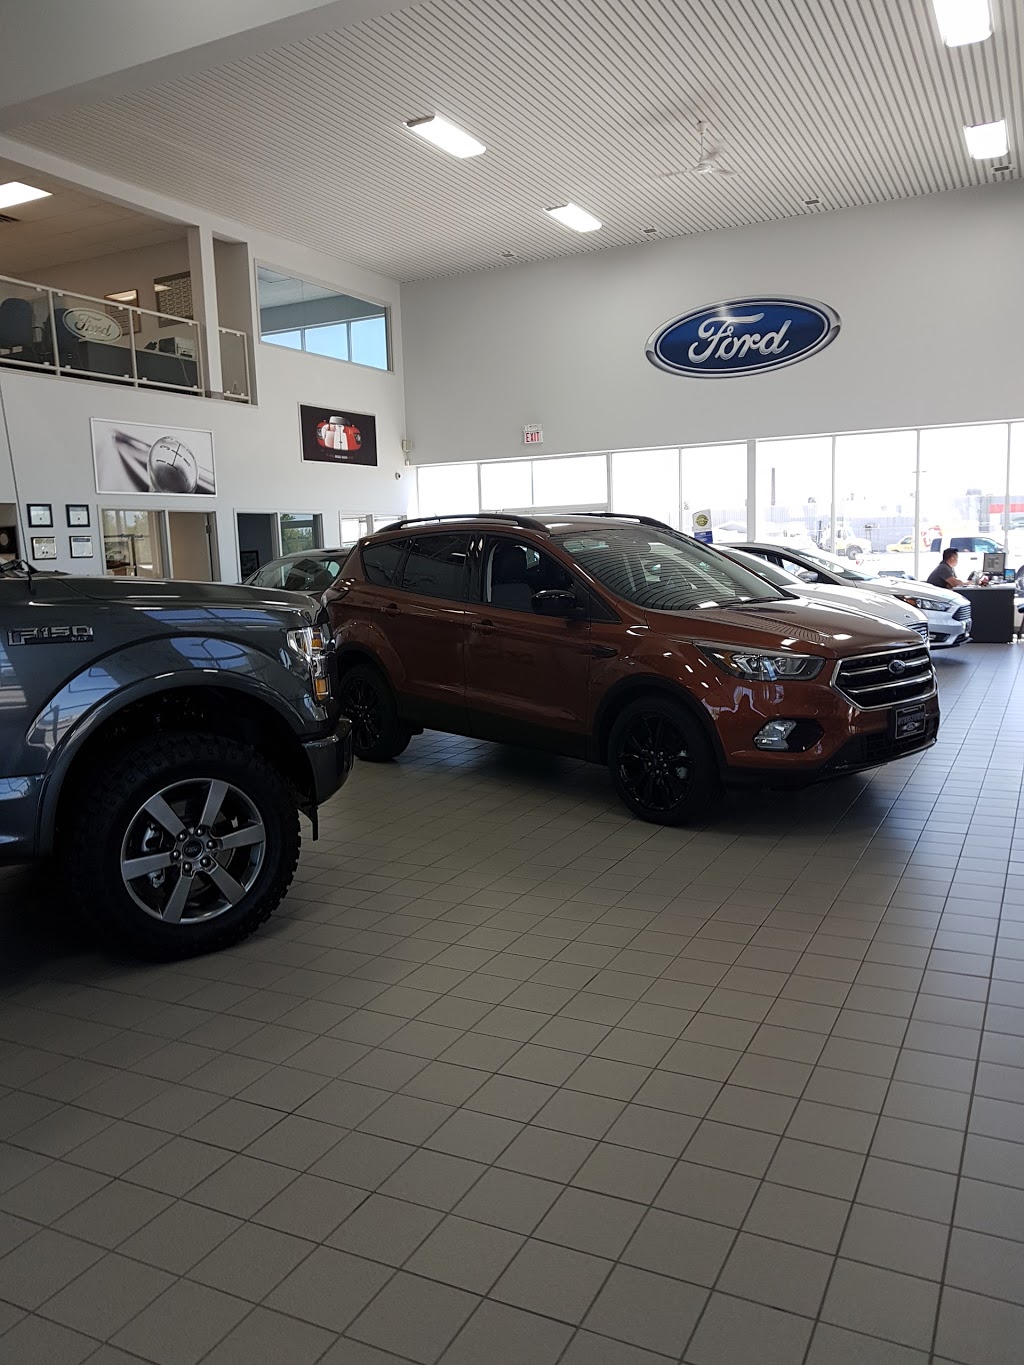 Steeltown Ford Sales | car dealer | 933 Manitoba Ave, Selkirk, MB R1A 3T7, Canada | 8443391028 OR +1 844-339-1028